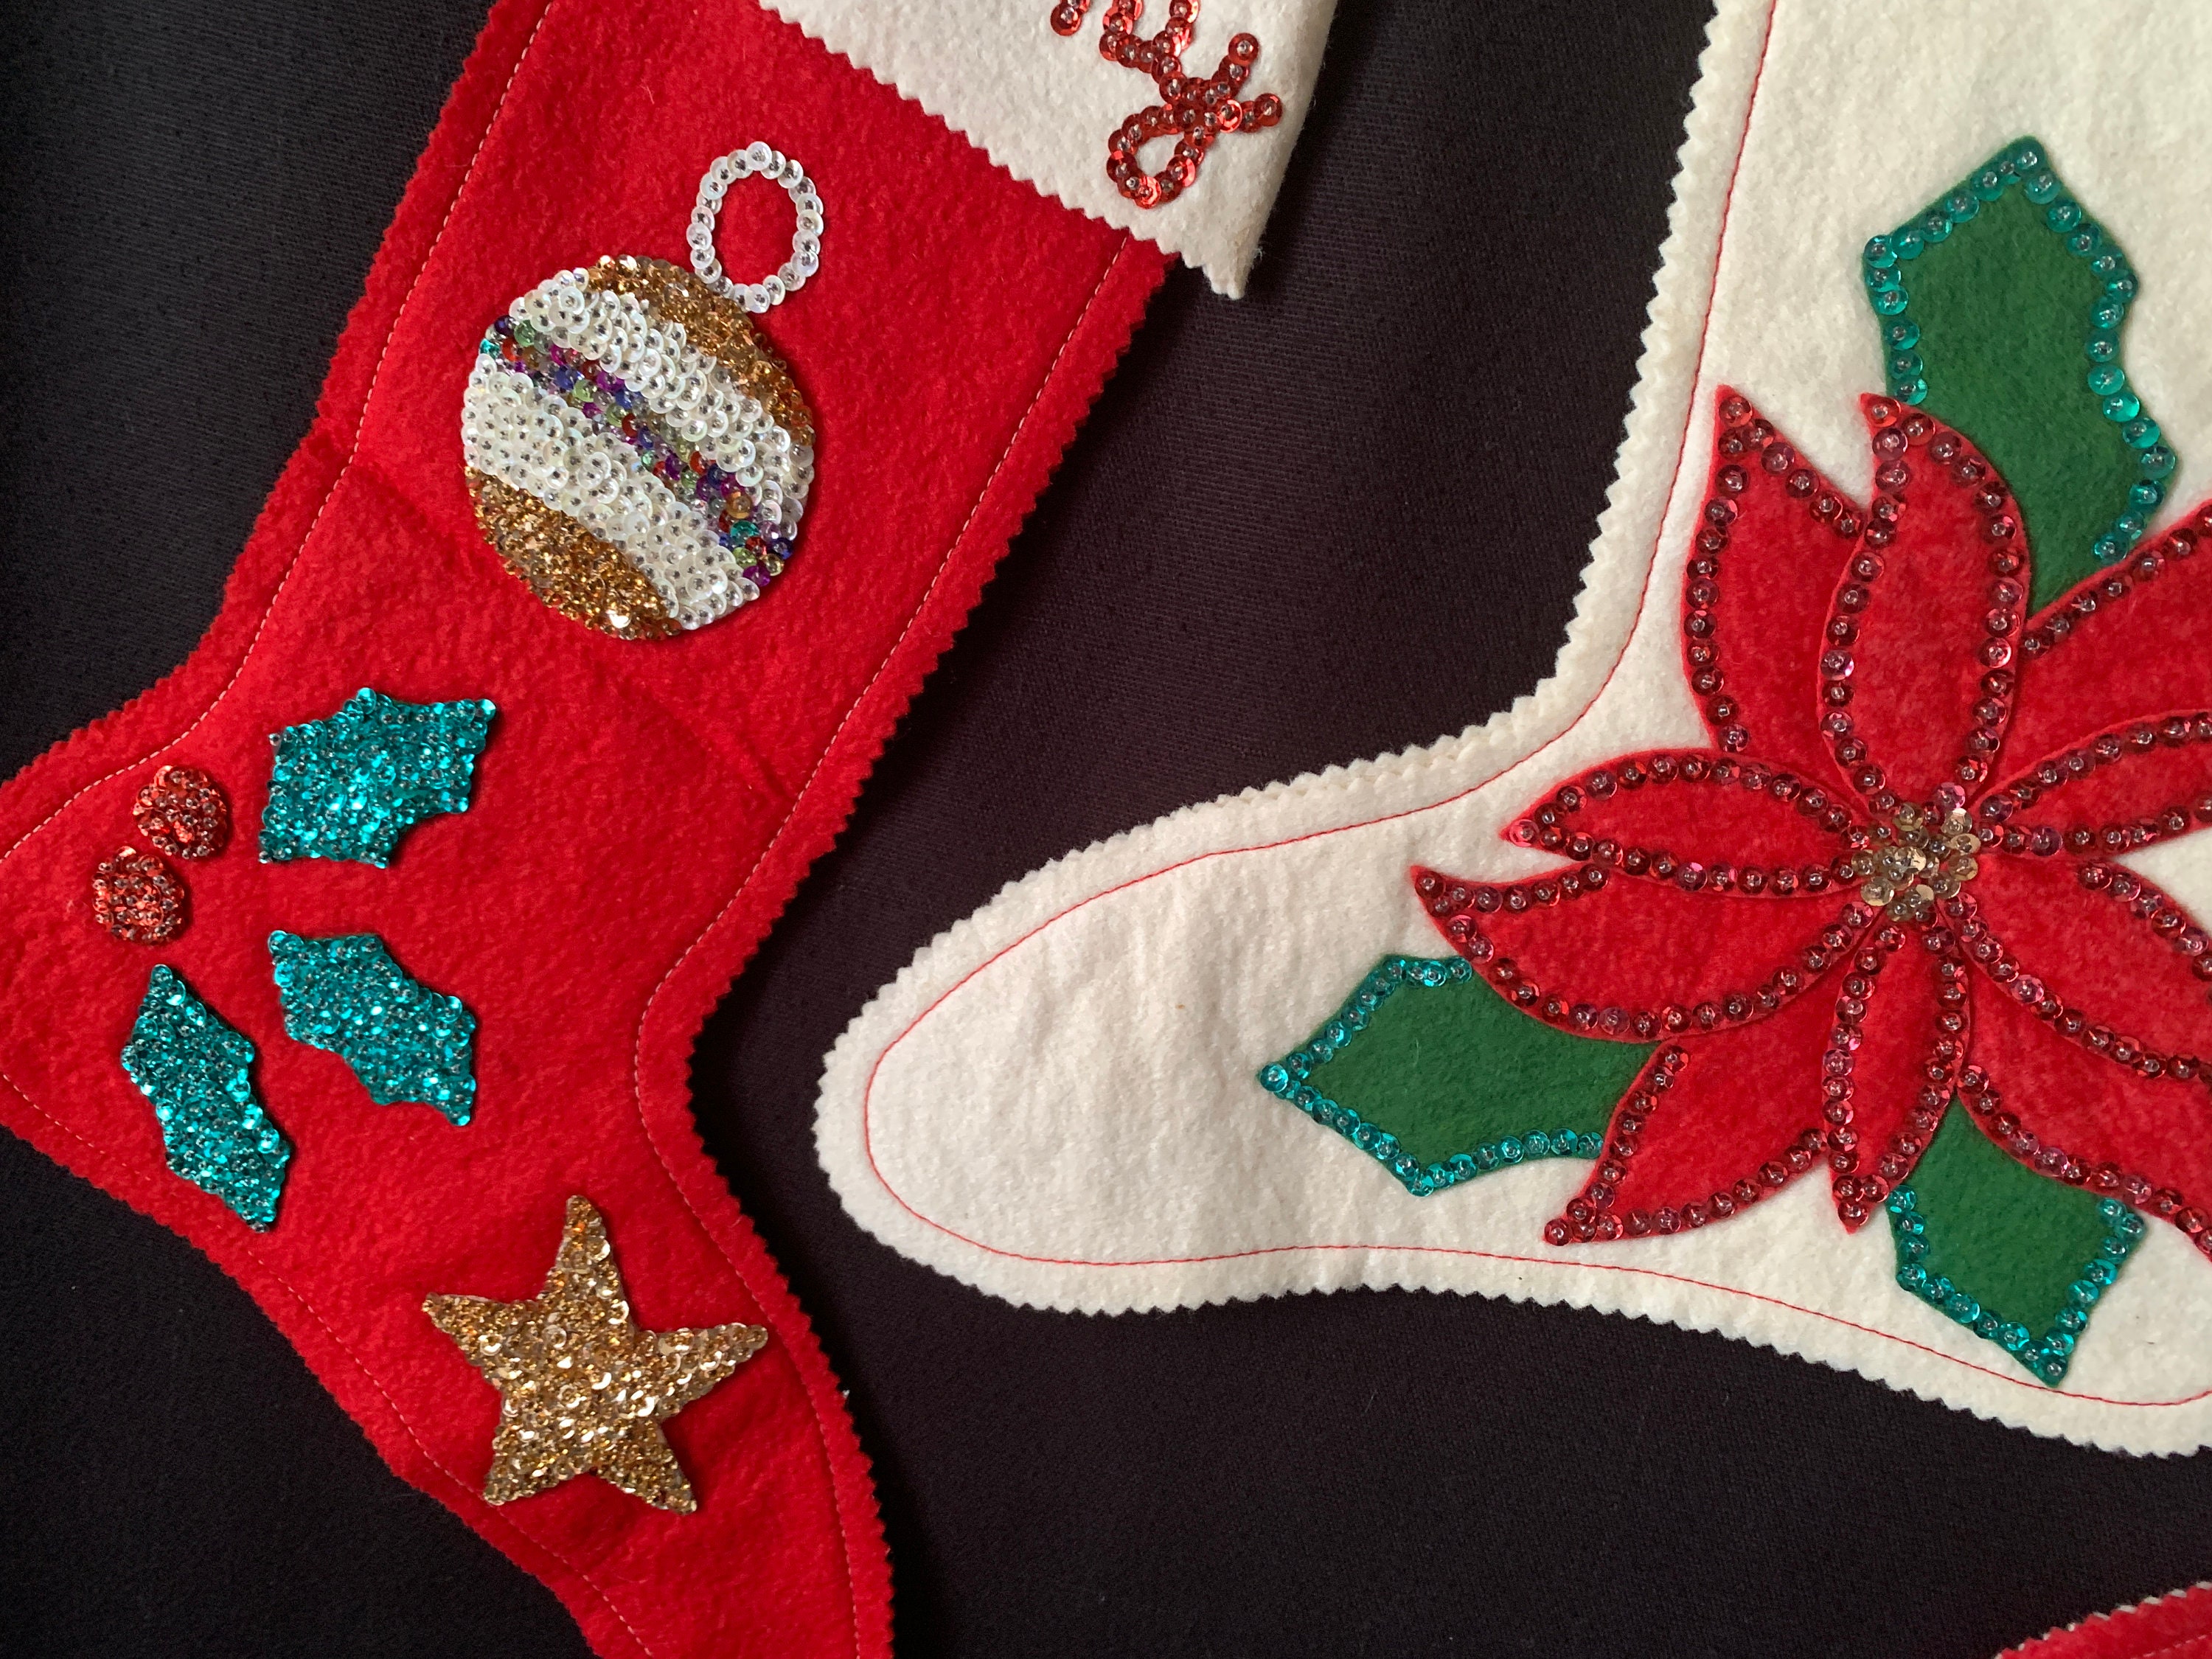 Felt Christmas Stockings - 14 Inch - 12 Count: Rebecca's Toys & Prizes